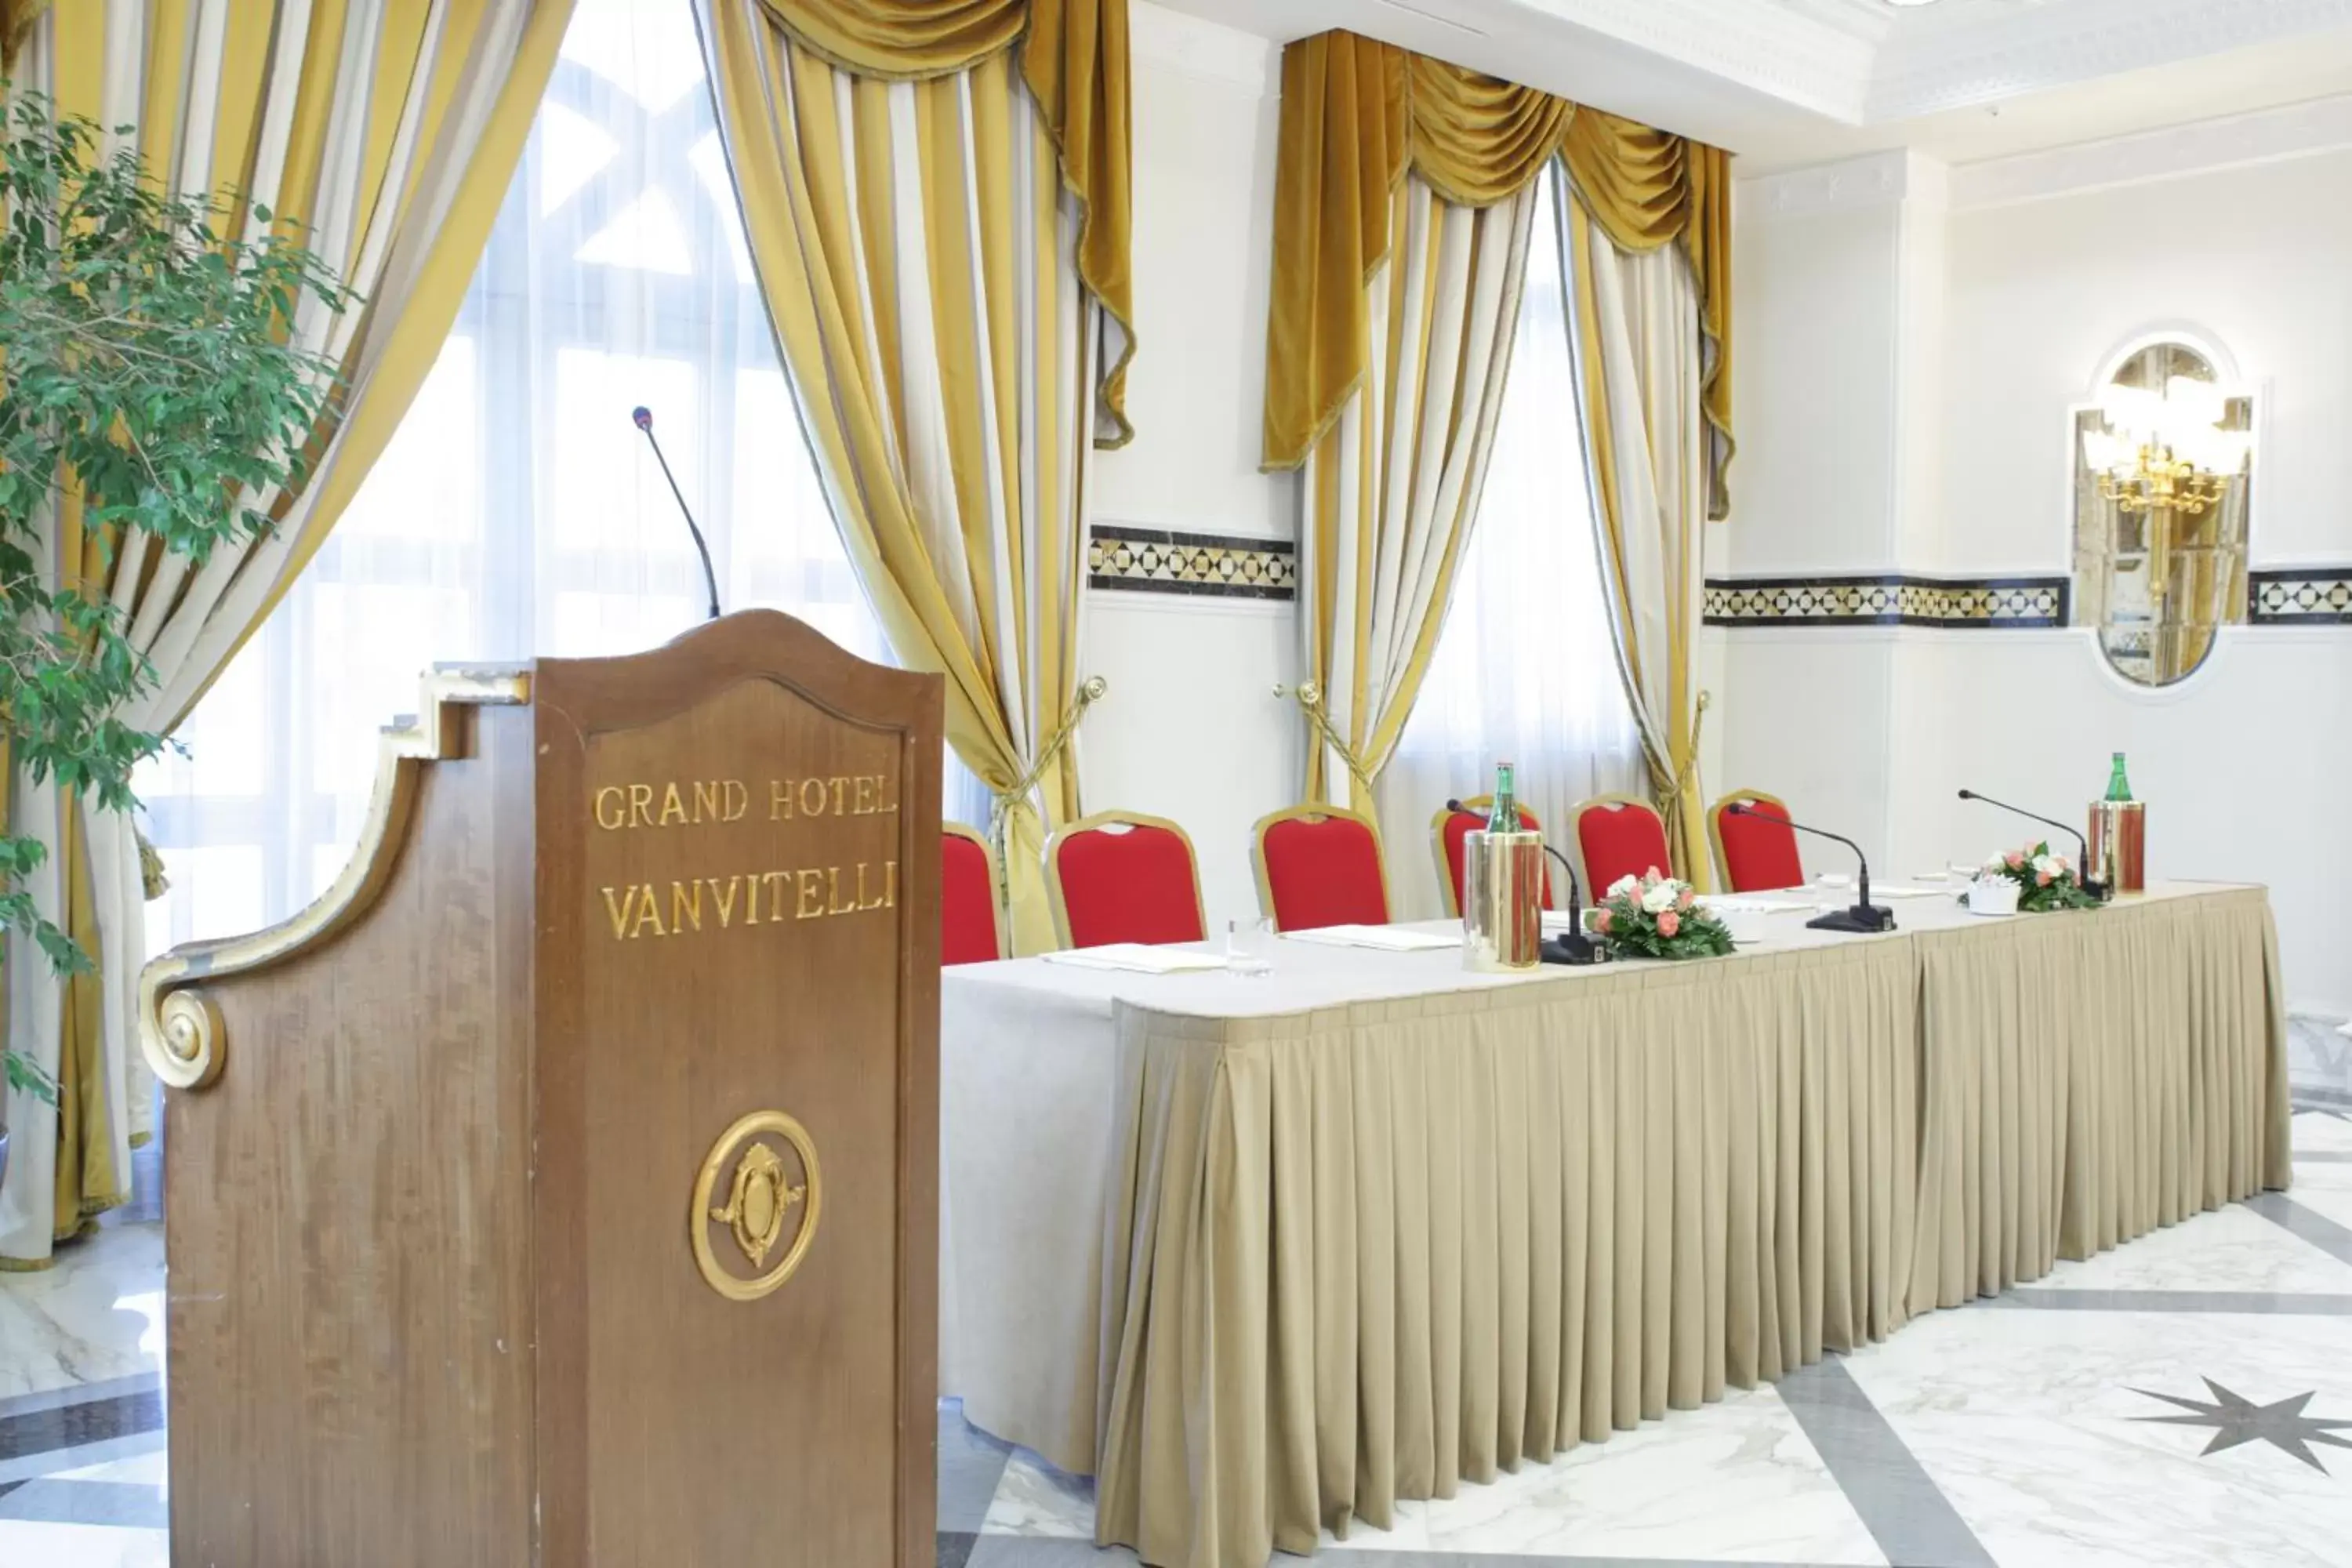 Meeting/conference room in Grand Hotel Vanvitelli